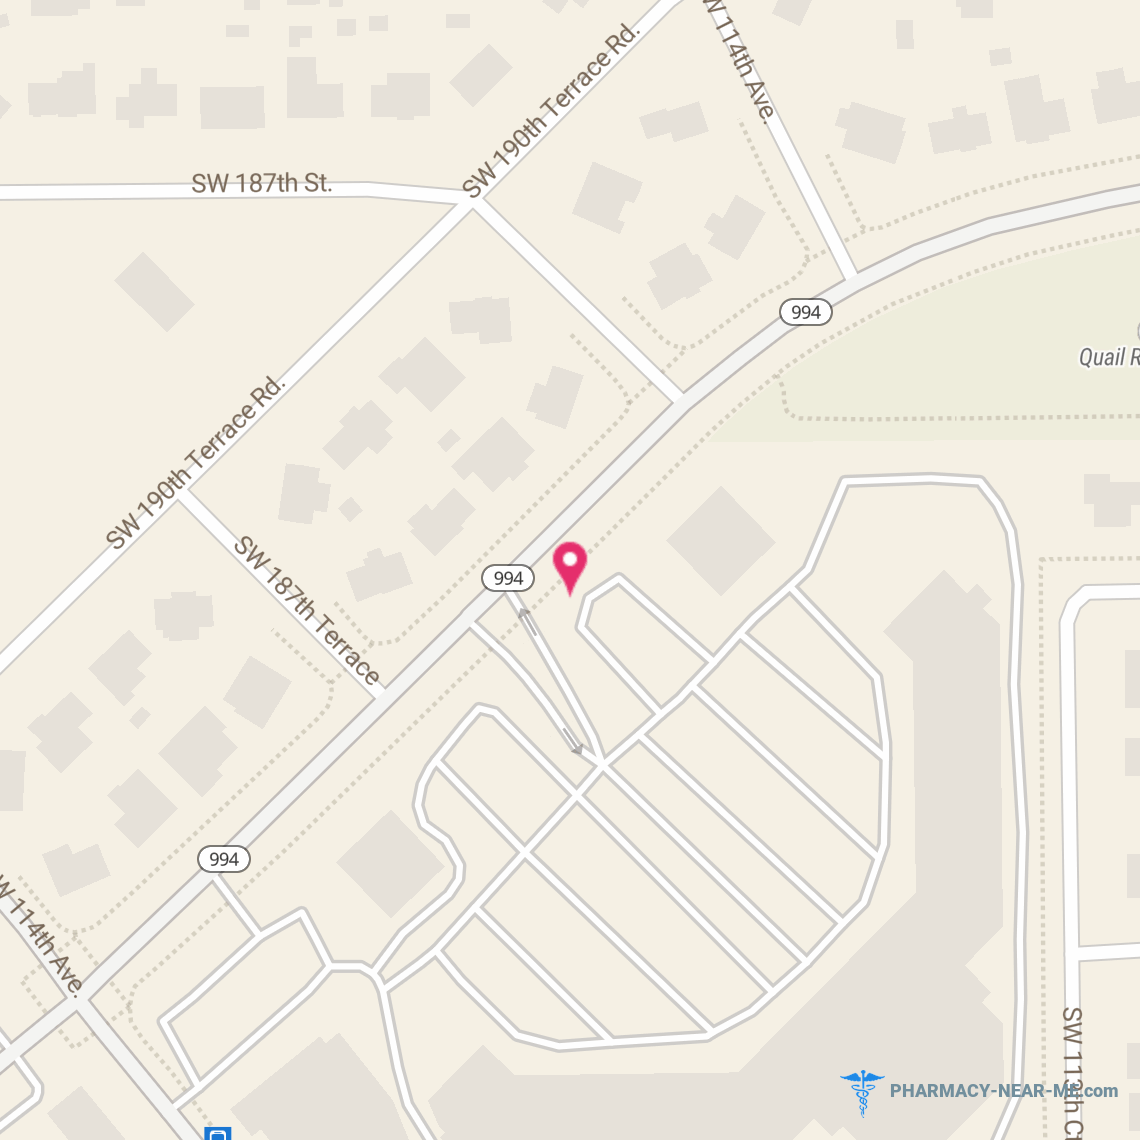 CVS PHARMACY - Pharmacy Hours, Phone, Reviews & Information: 11398 Quail Roost Drive, Miami, Florida 33157, United States